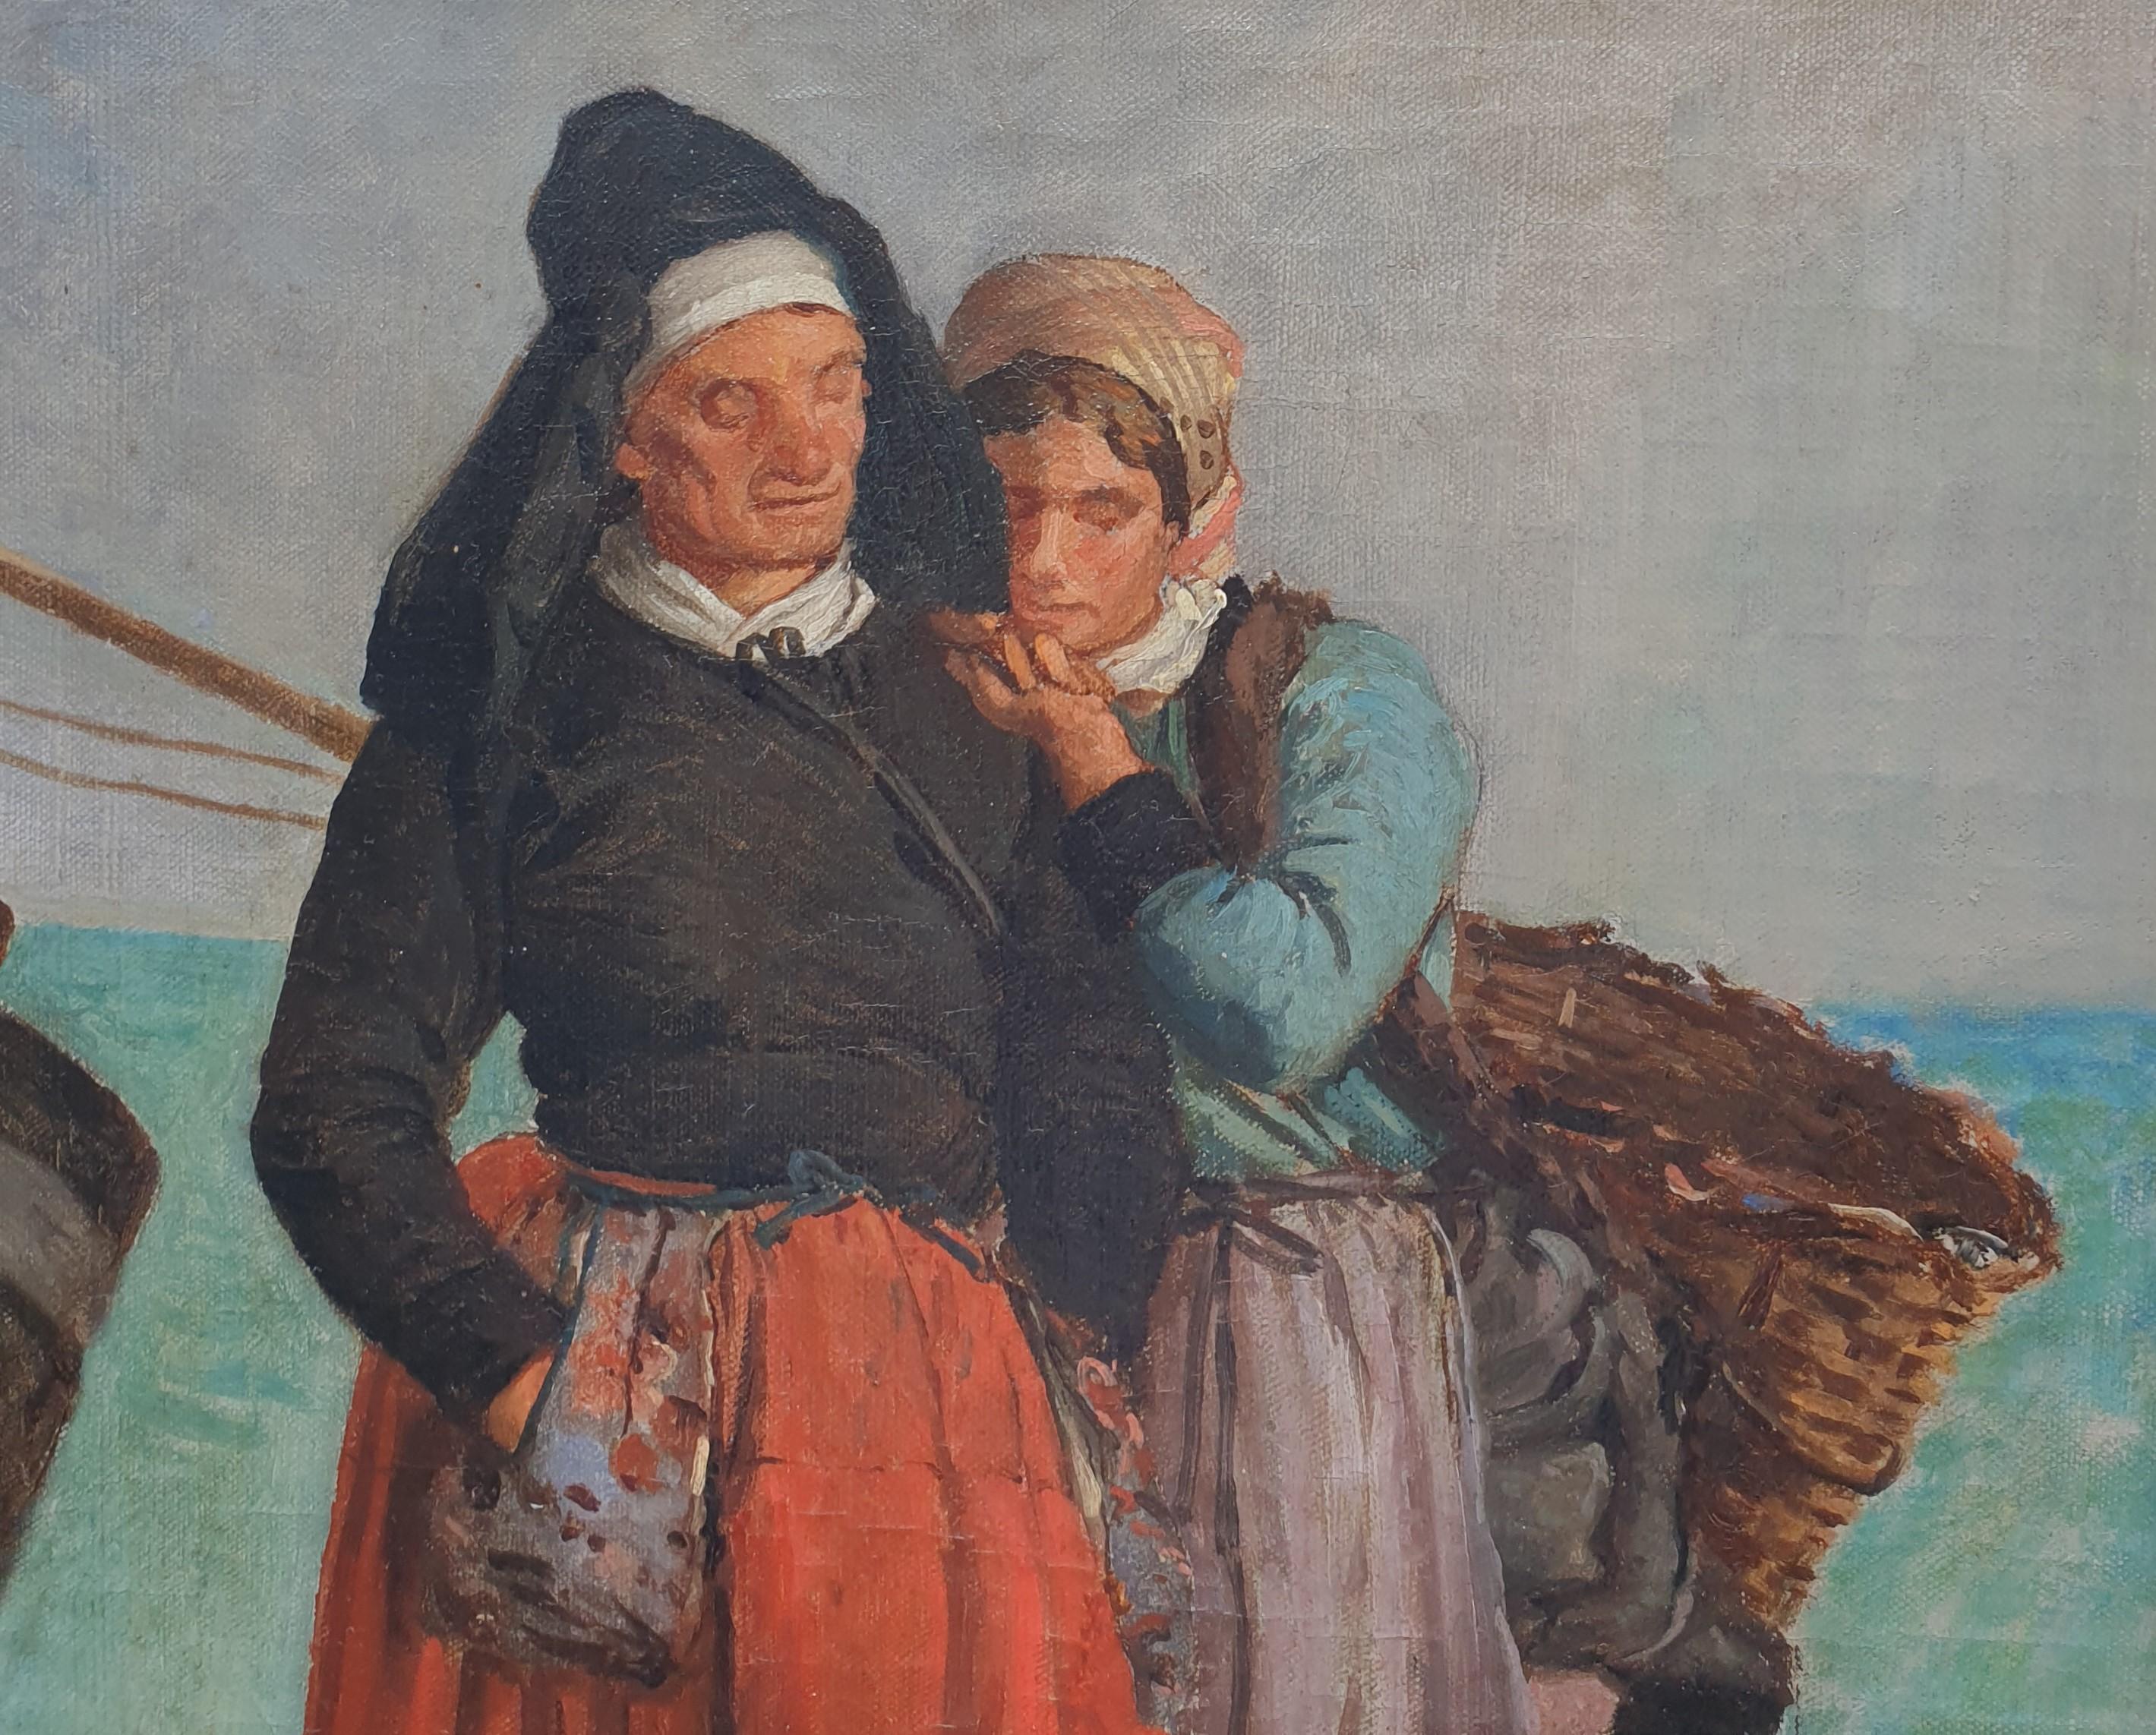 Realist french painting Fishermen wifes BILLET portrait costumes 19th  - Gray Figurative Painting by Pierre Billet